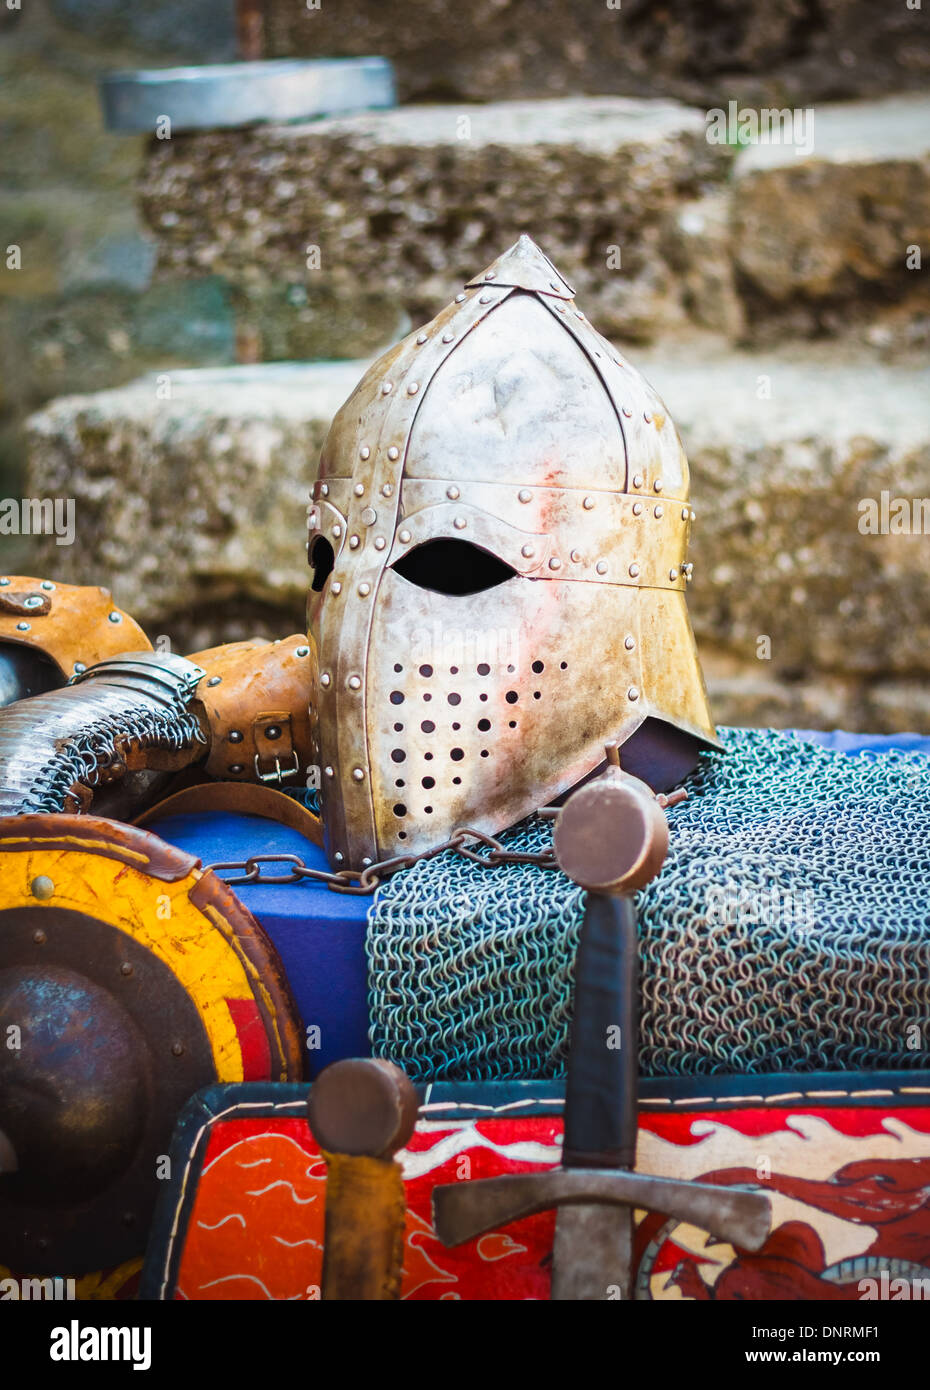 Protective Helmet With A Visor On Medieval Knight. Medieval Templar Helmet Waiting For Knight Stock Photo